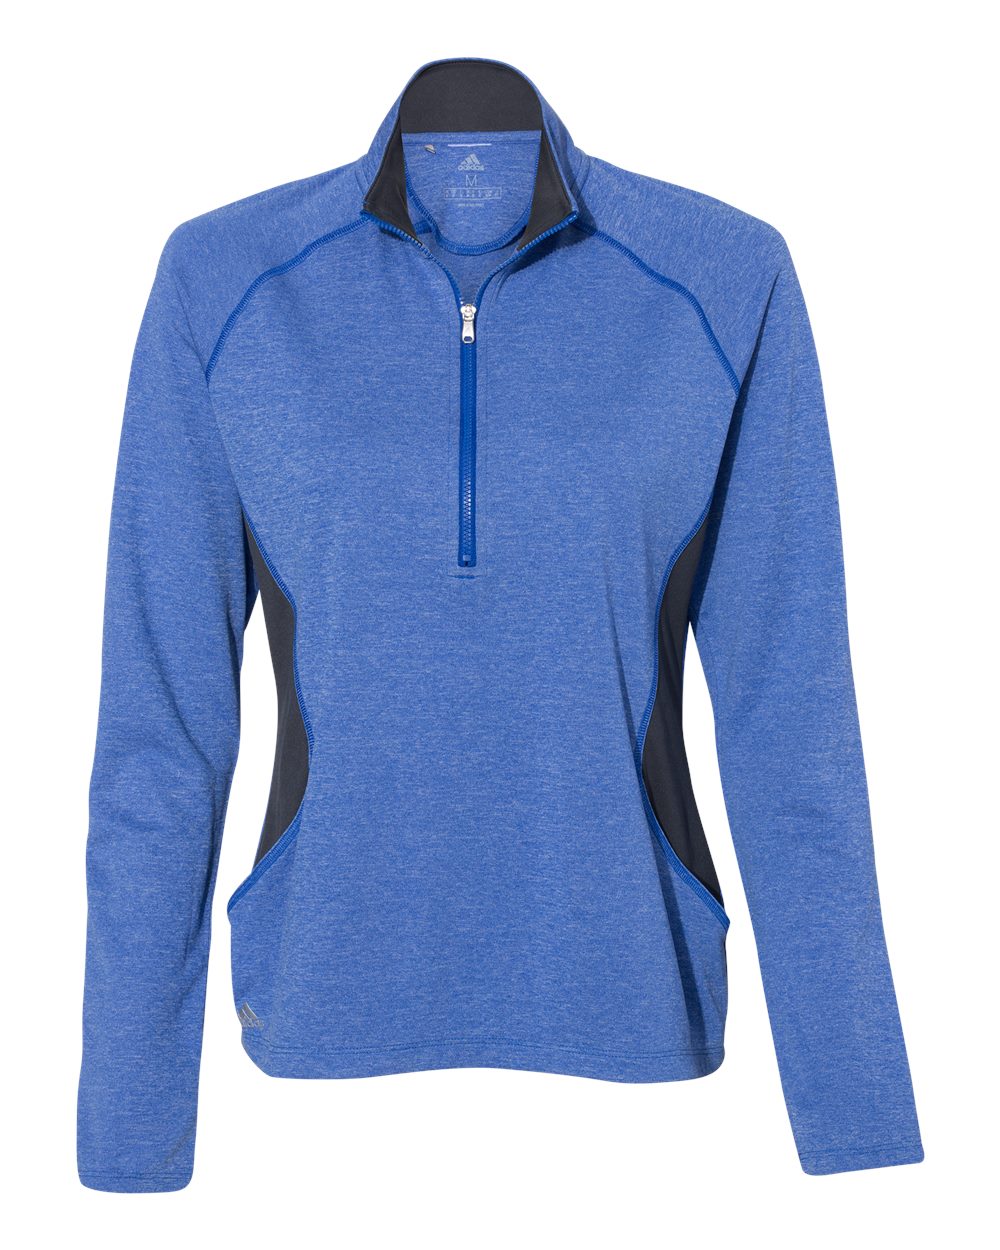 click to view Collegiate Royal Heather/ Carbon